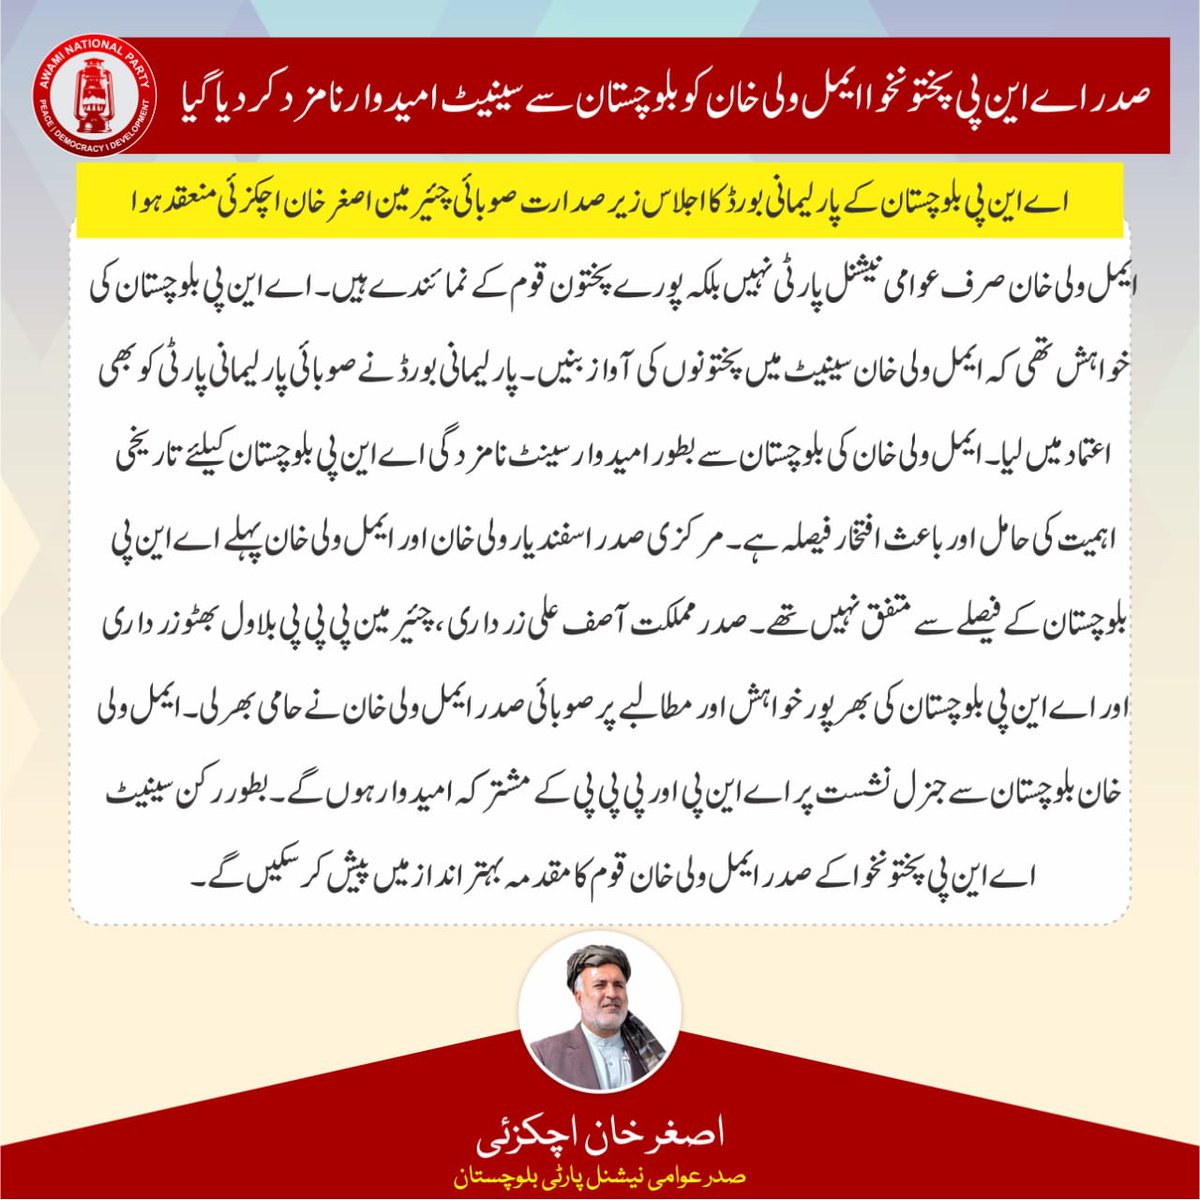 Welcome @AimalWali to #SenateElections from Balochistan.
Credit goes to #ANPBalochistan president @AsgharAchakzaii